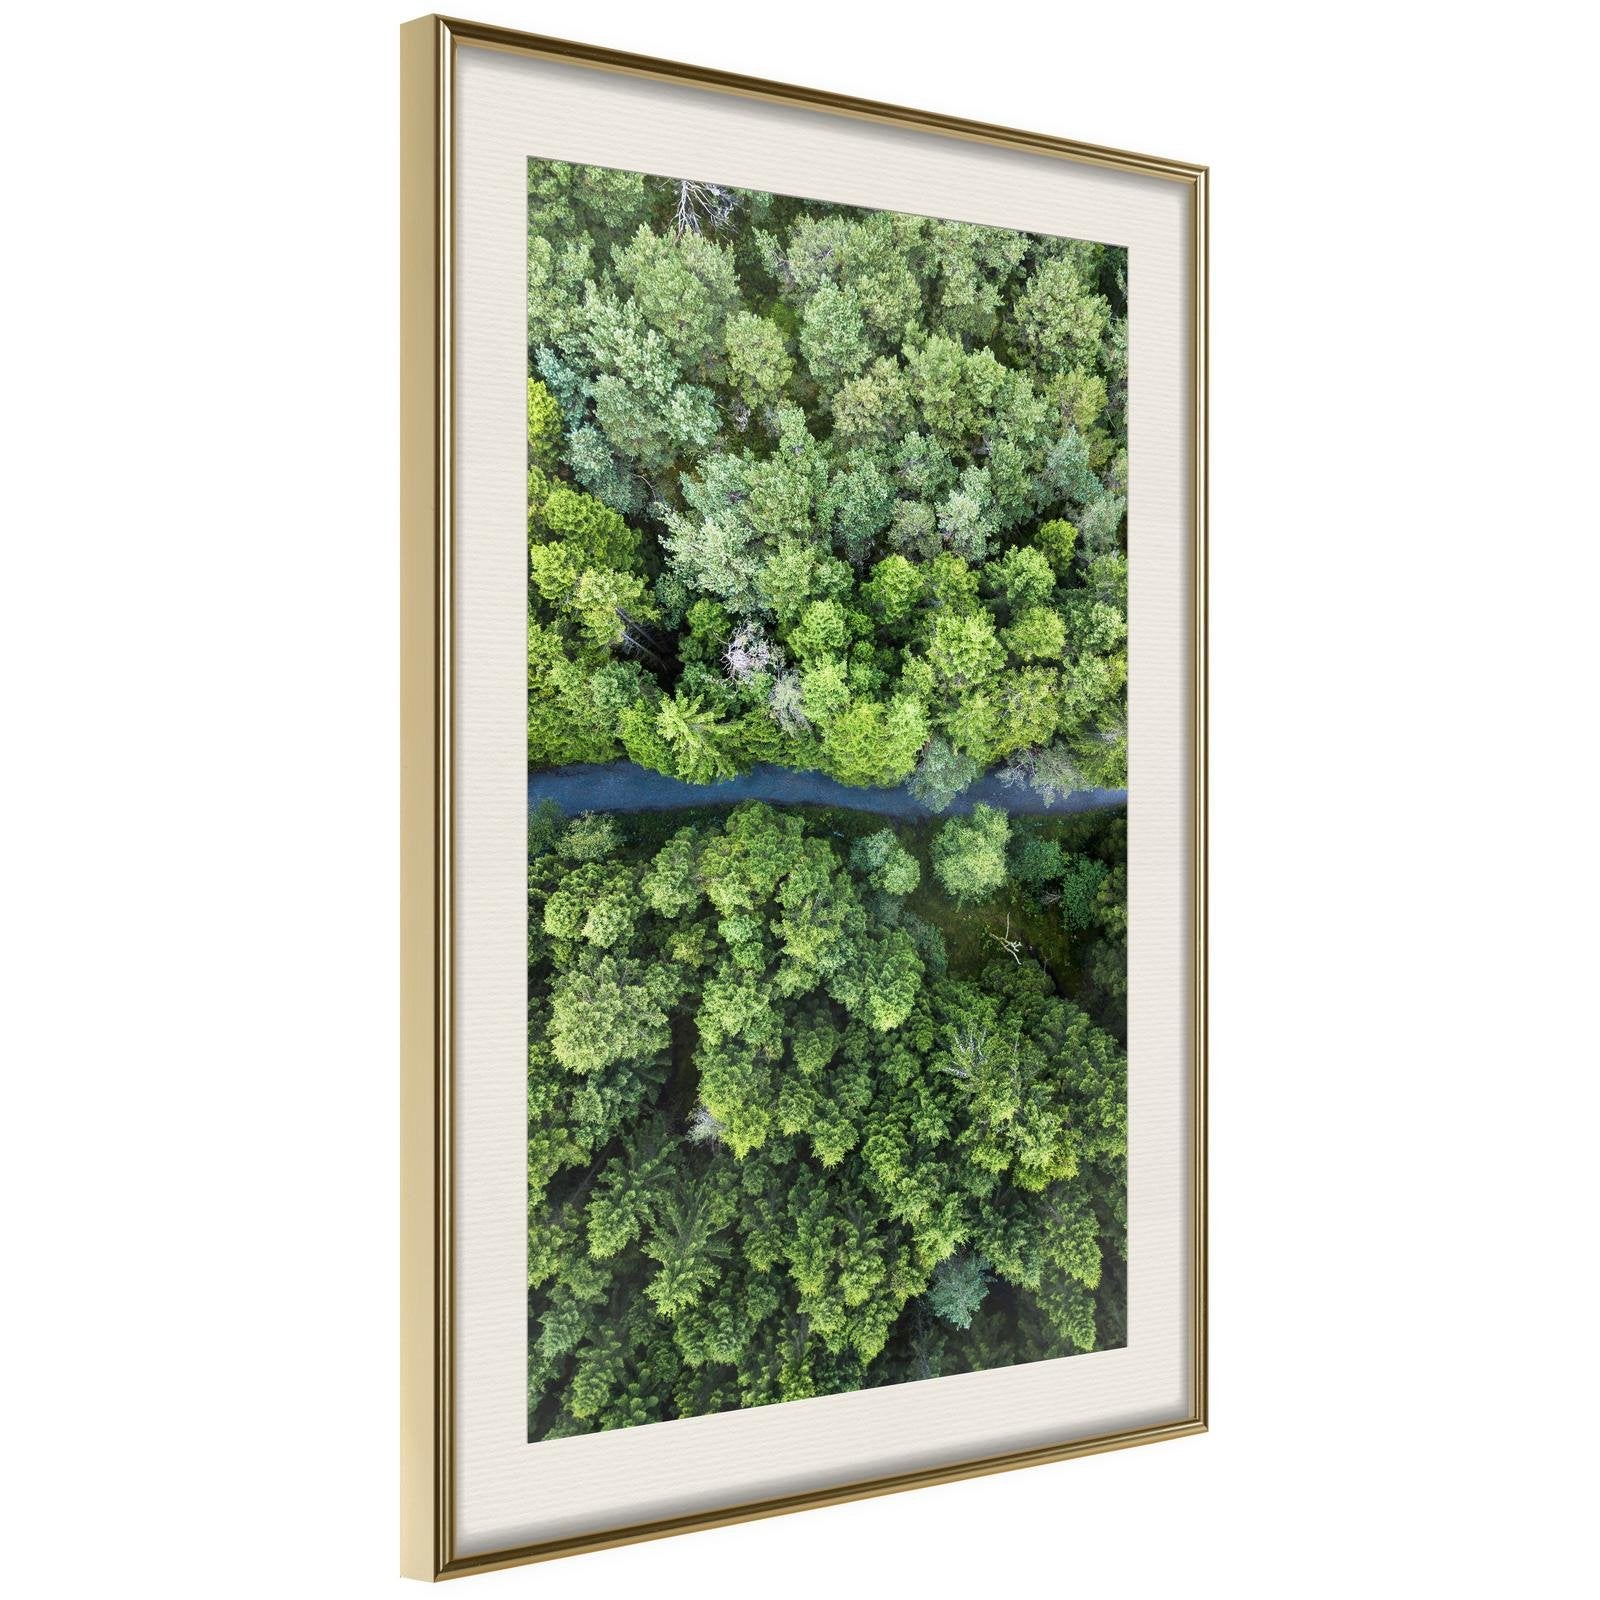 Inramad Poster / Tavla - Forest from a Birds Eye View - 20x30 Guldram med passepartout